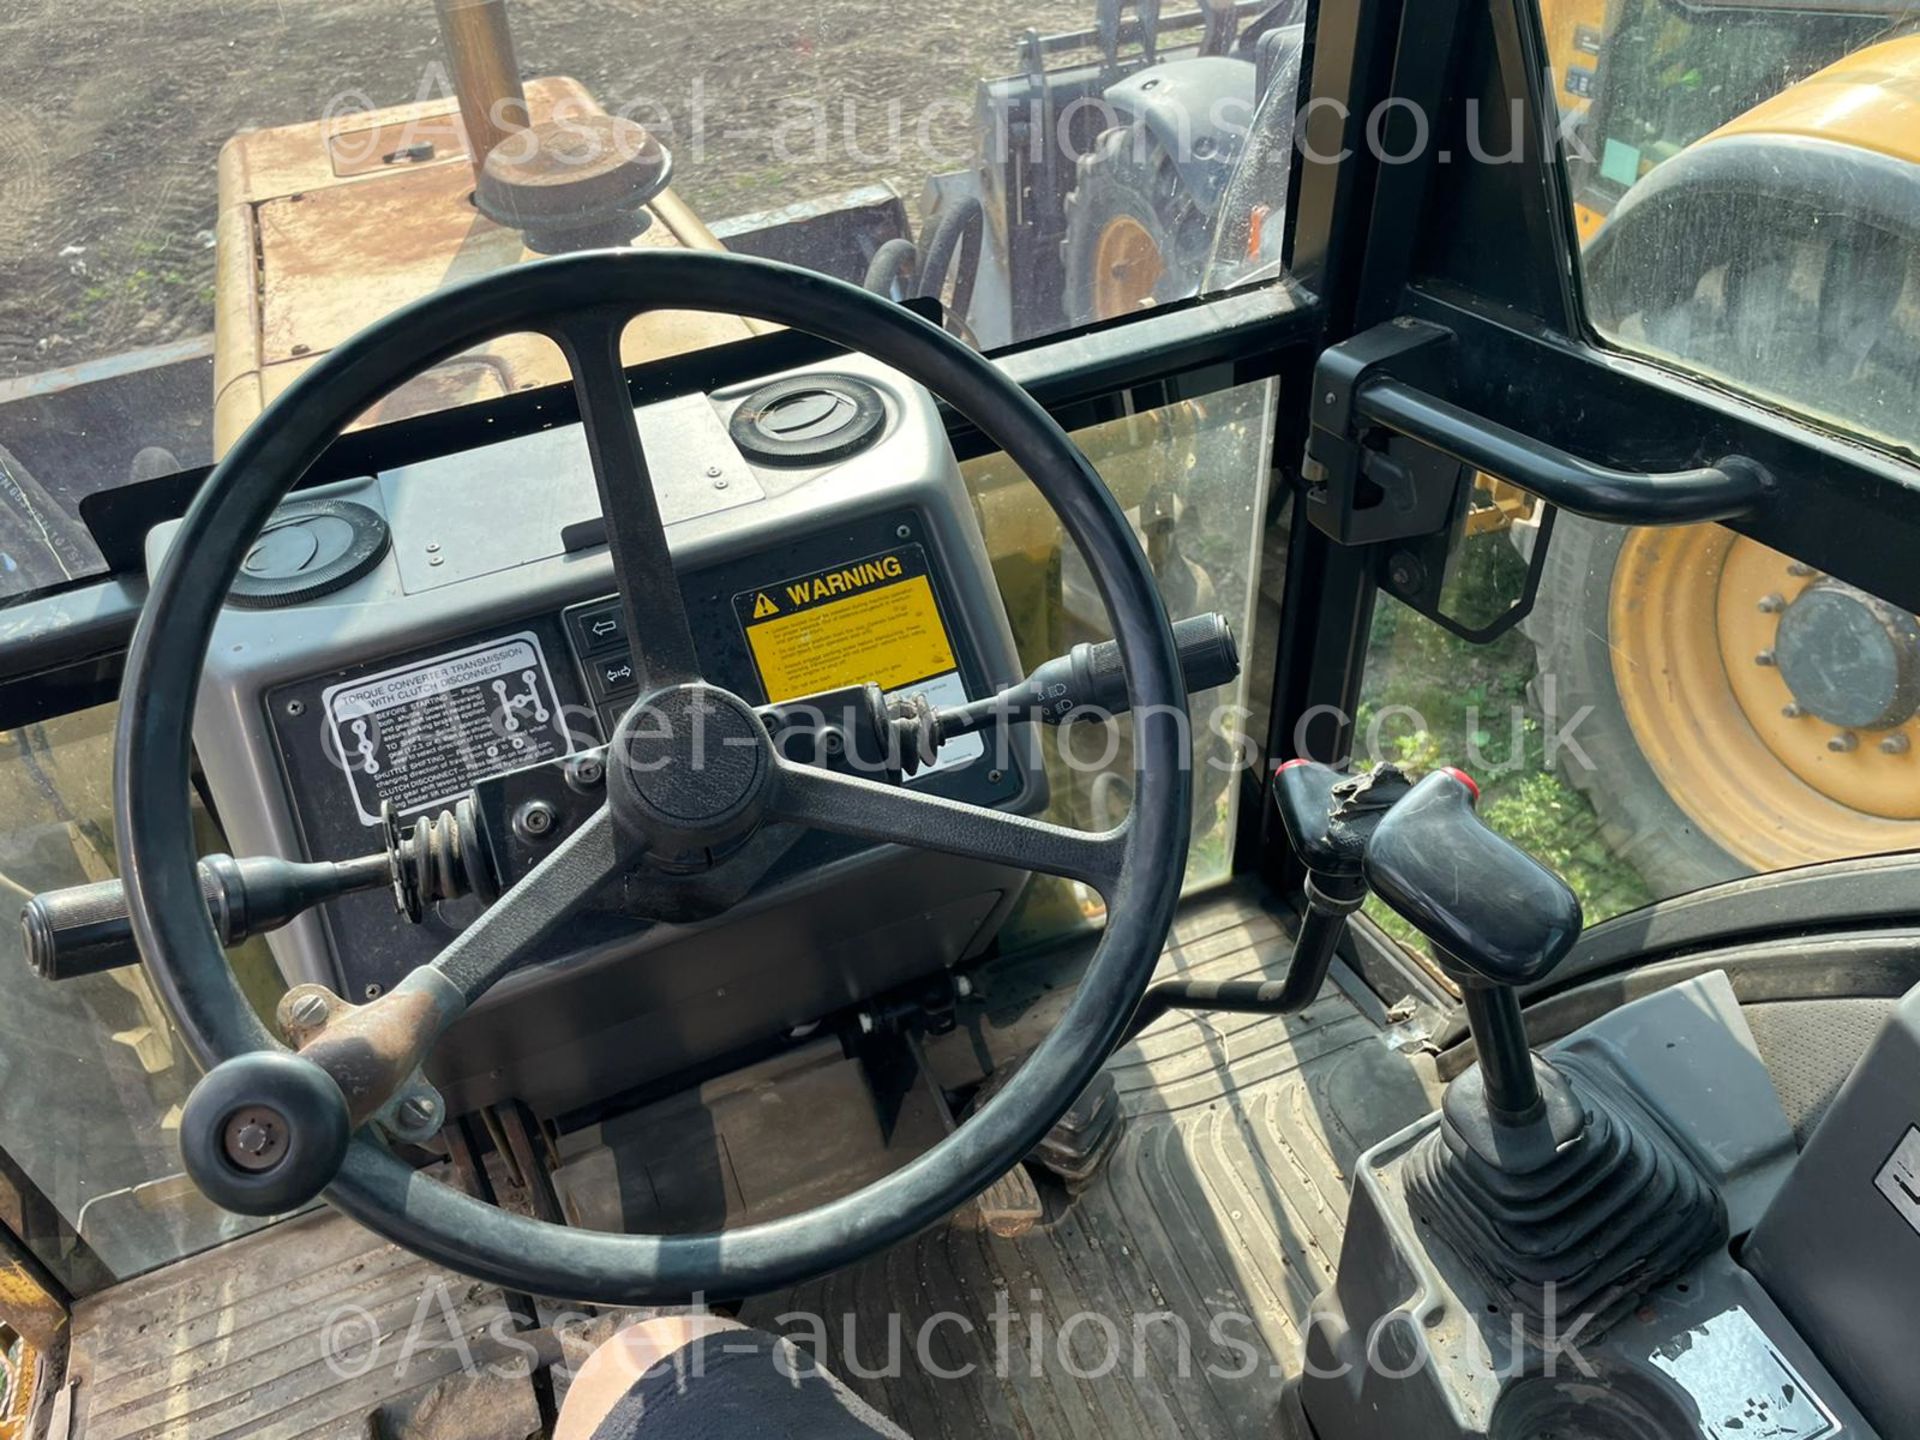 FORD 655D WHEEL DIGGER, RUNS DRIVES AND LIFTS, ROAD REGISTERED, FULLY GLASS CAB *PLUS VAT* - Image 27 of 28